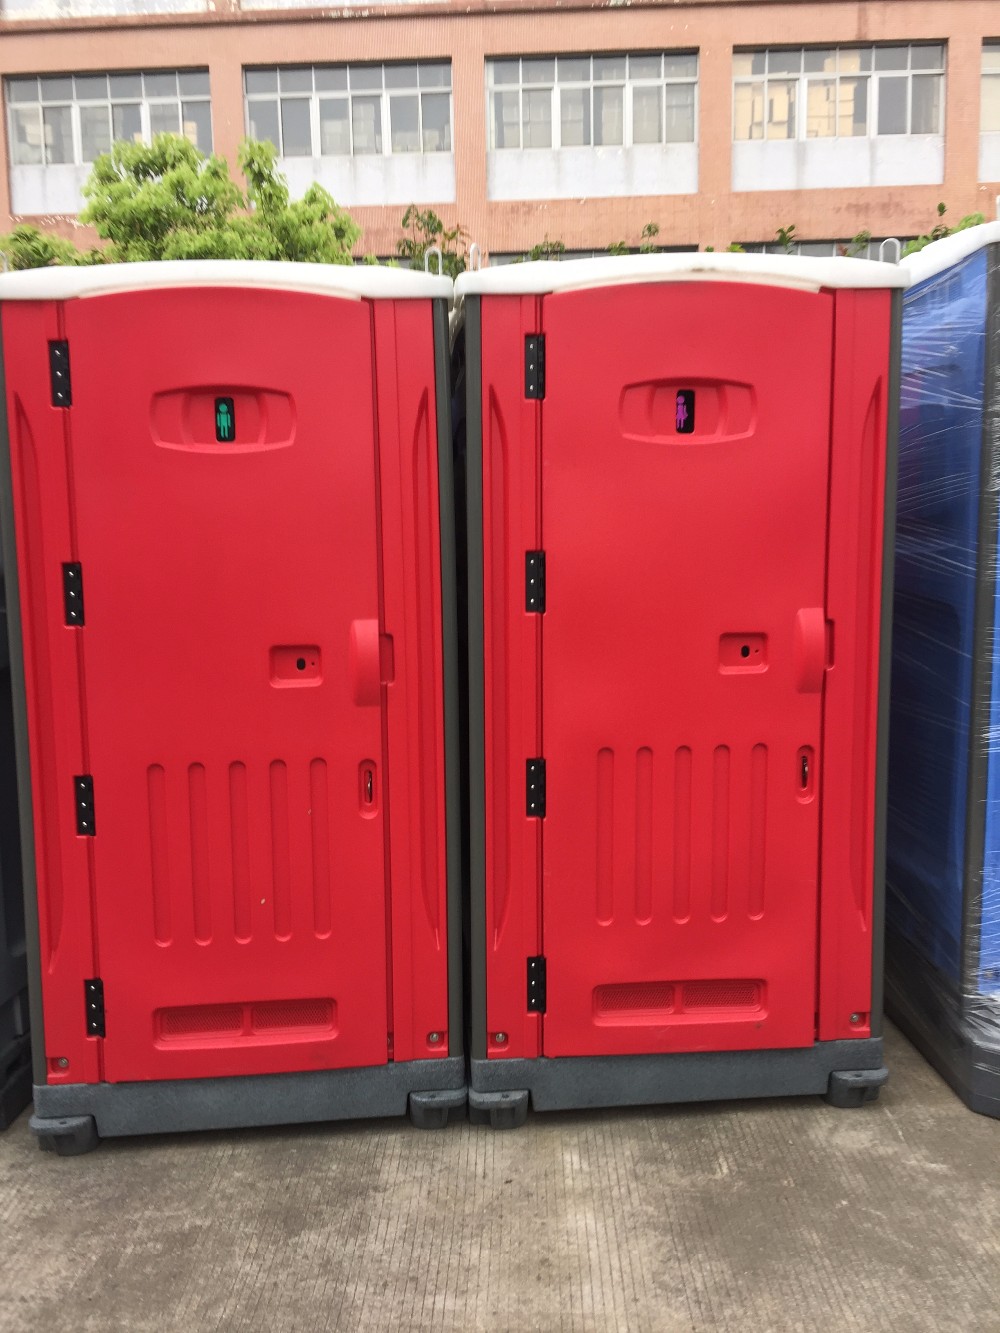 HDPE portable toilet Waterproof Well-designed Portable Toilet Plastic portable toilet